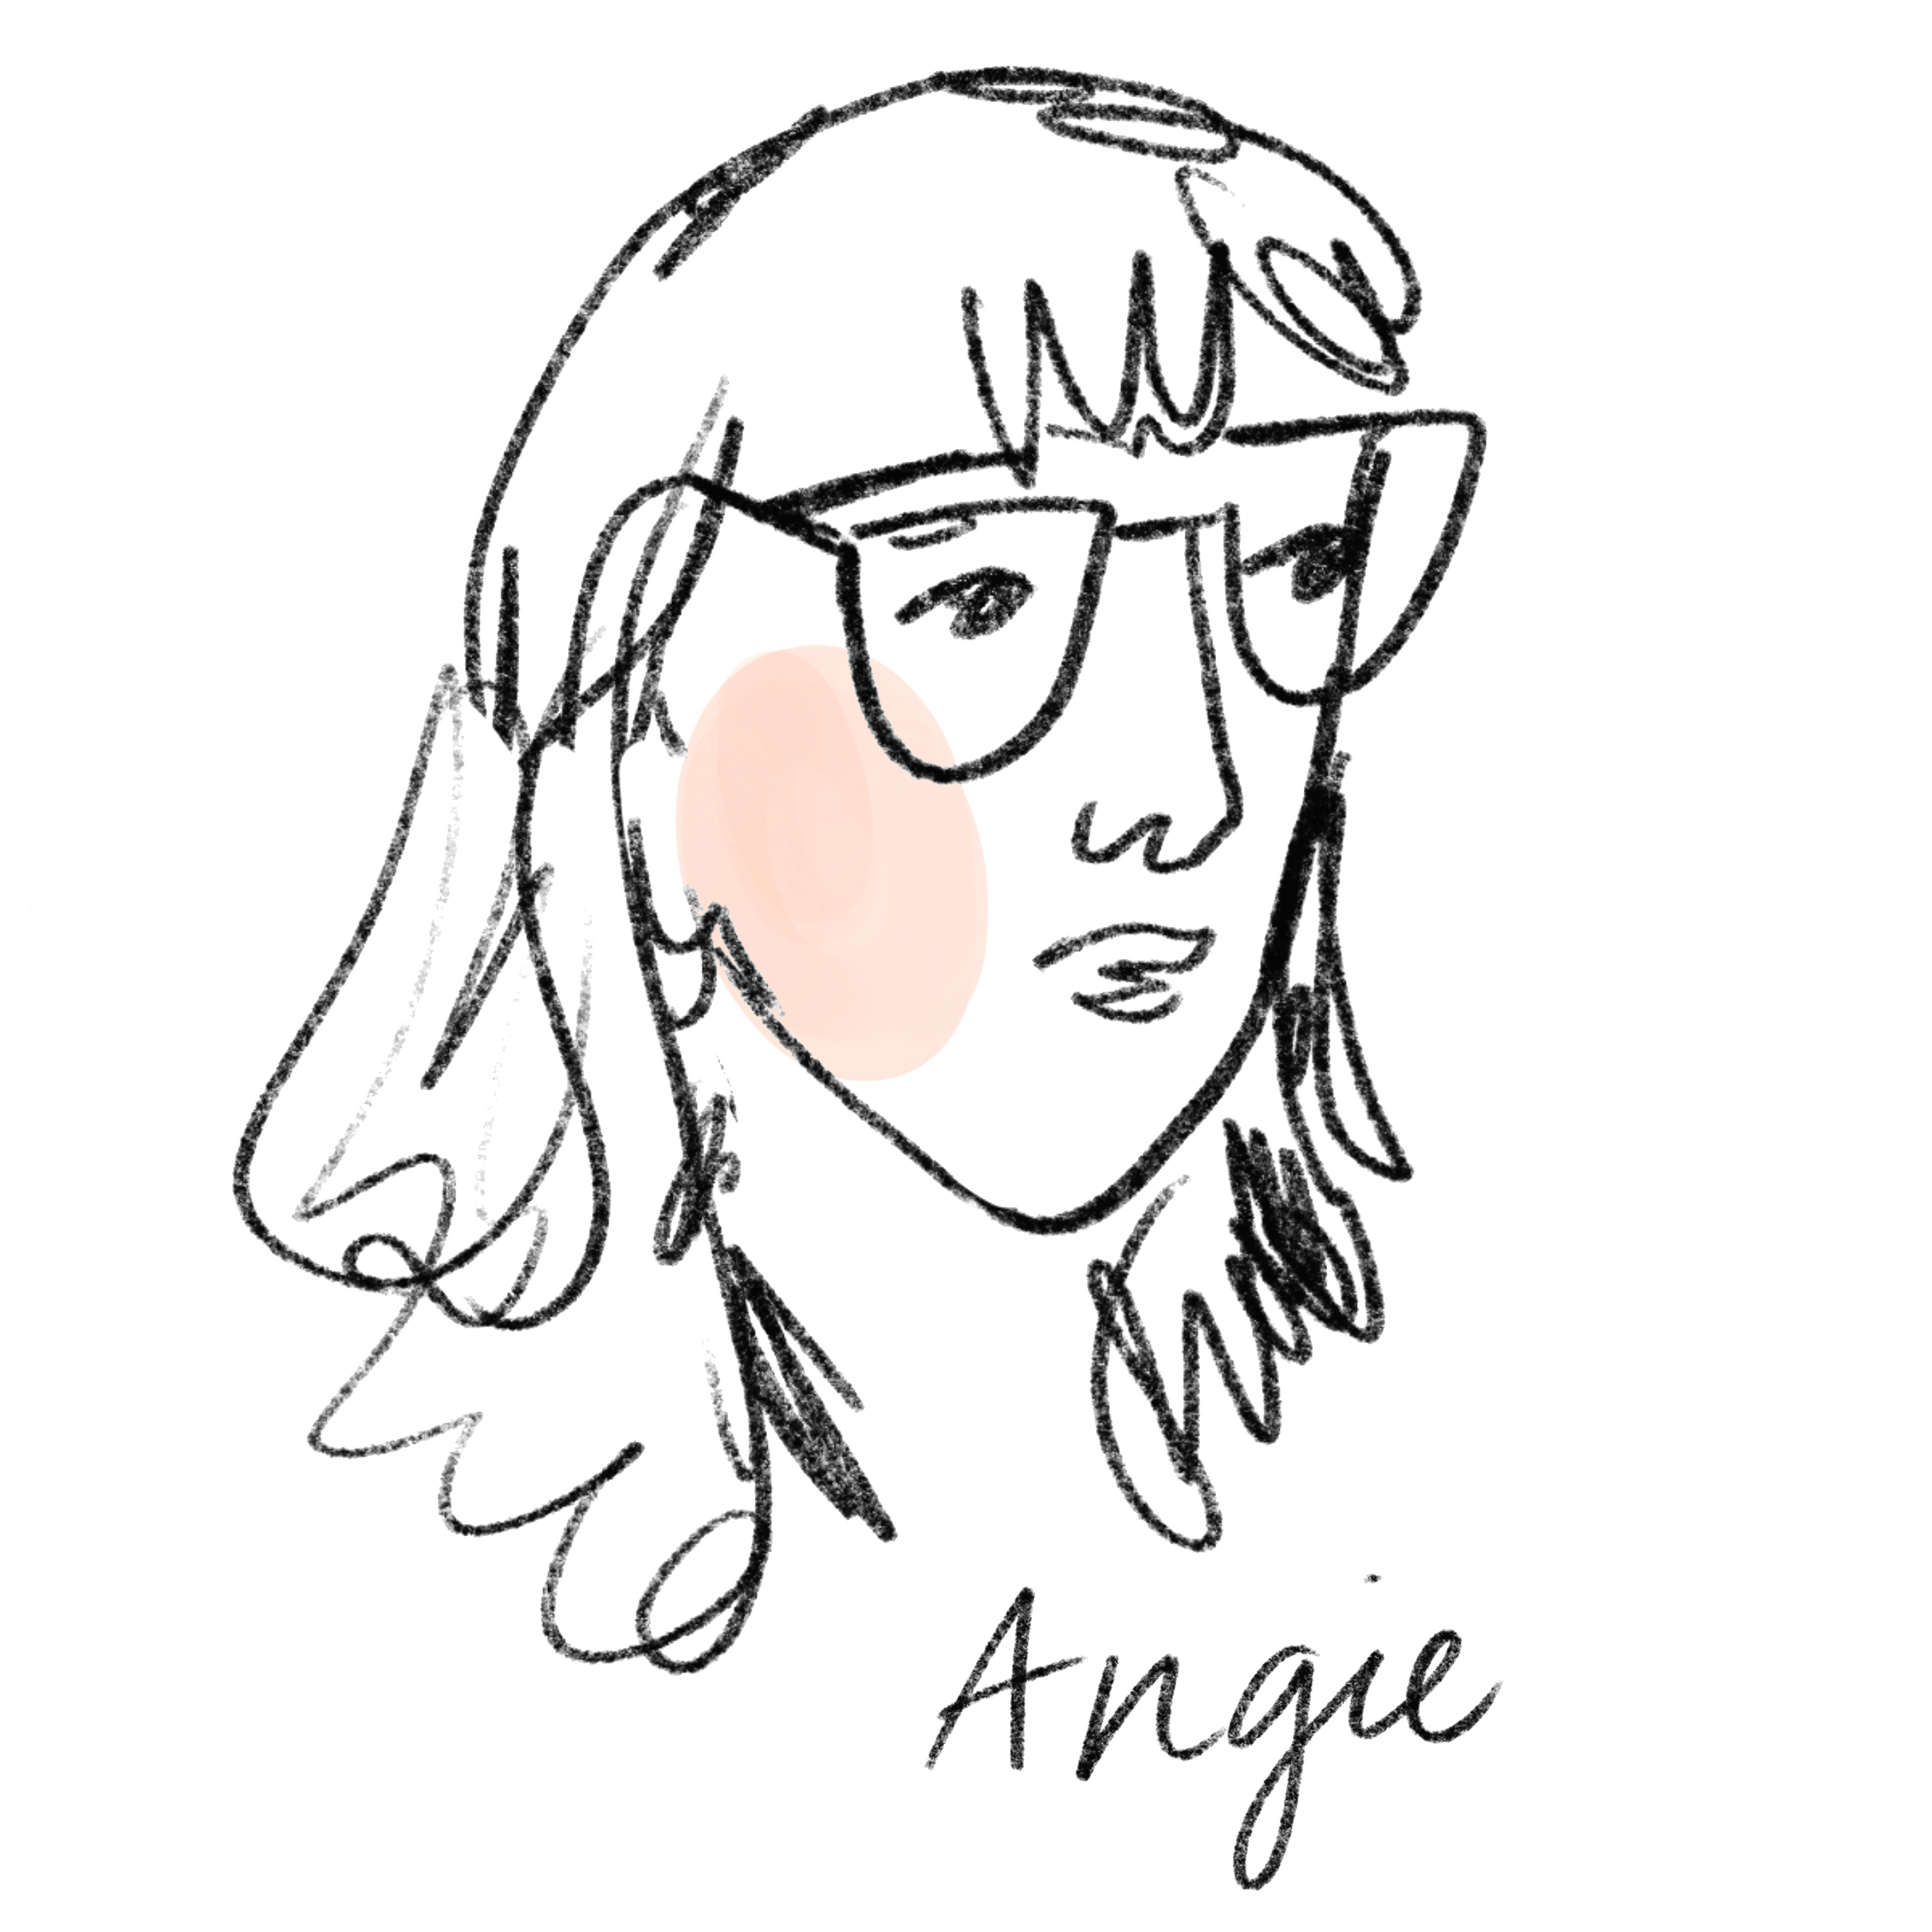 Illustrated portrait of Angie Rizzo